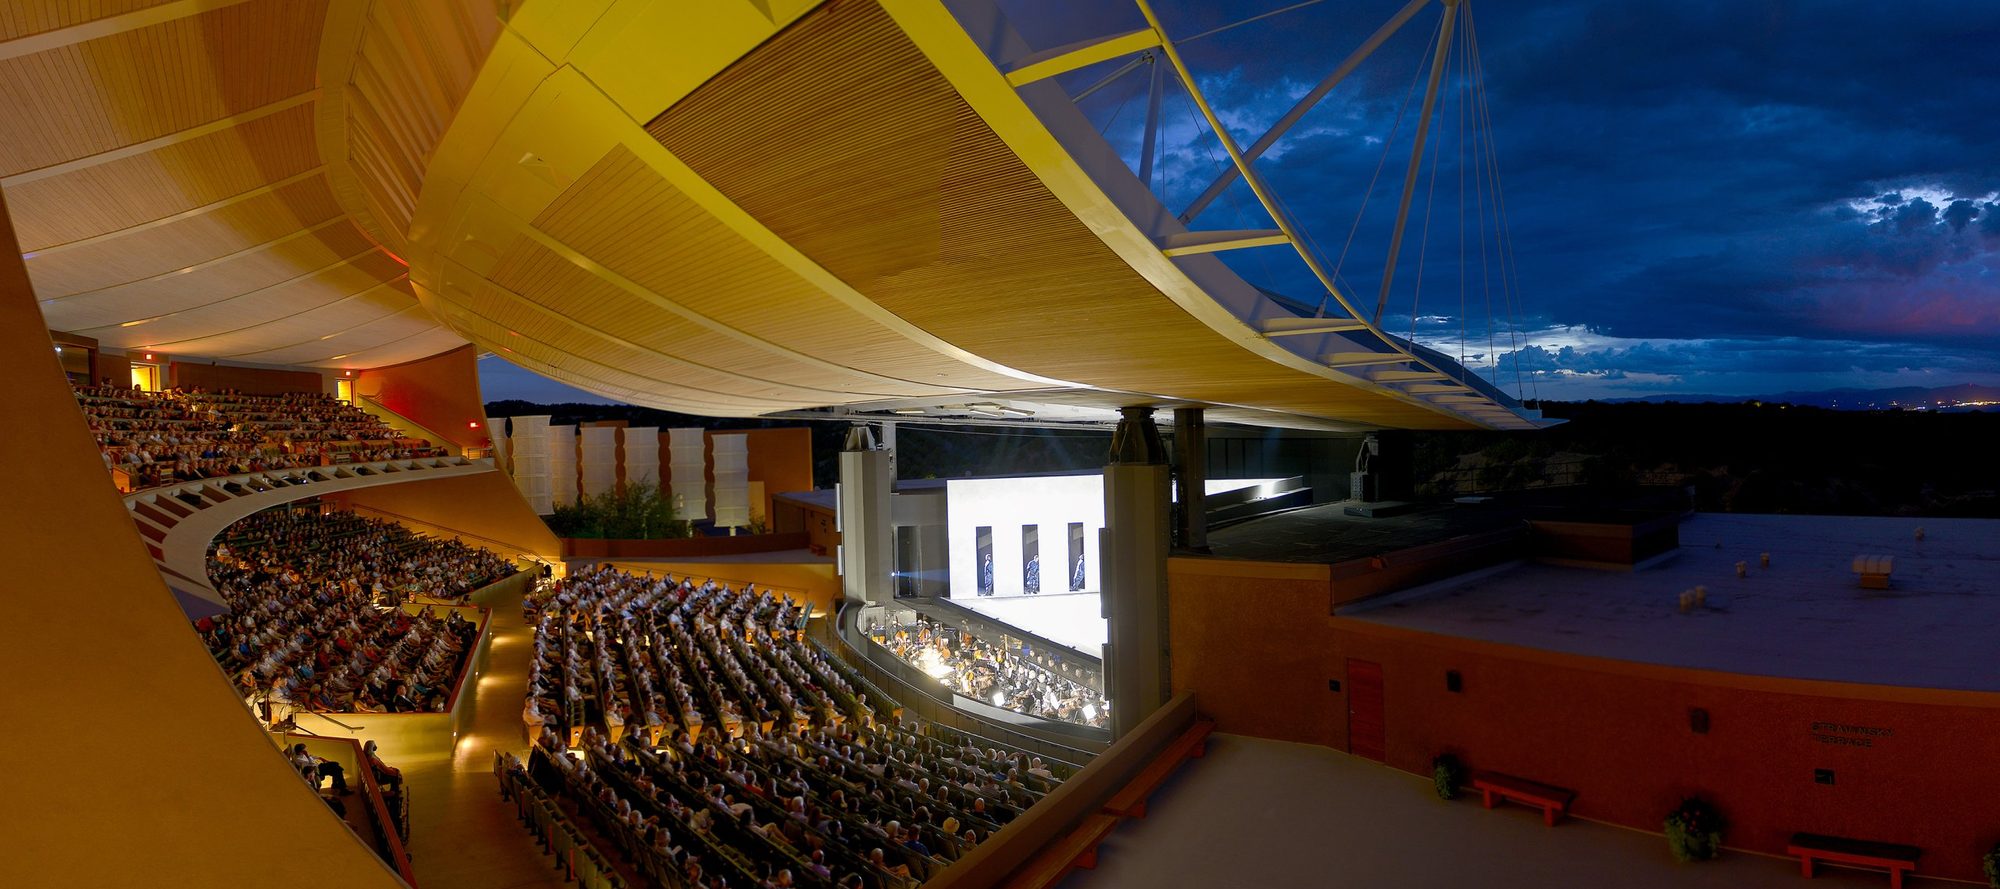 The Santa Fe Opera Named Festival of the Year at the International